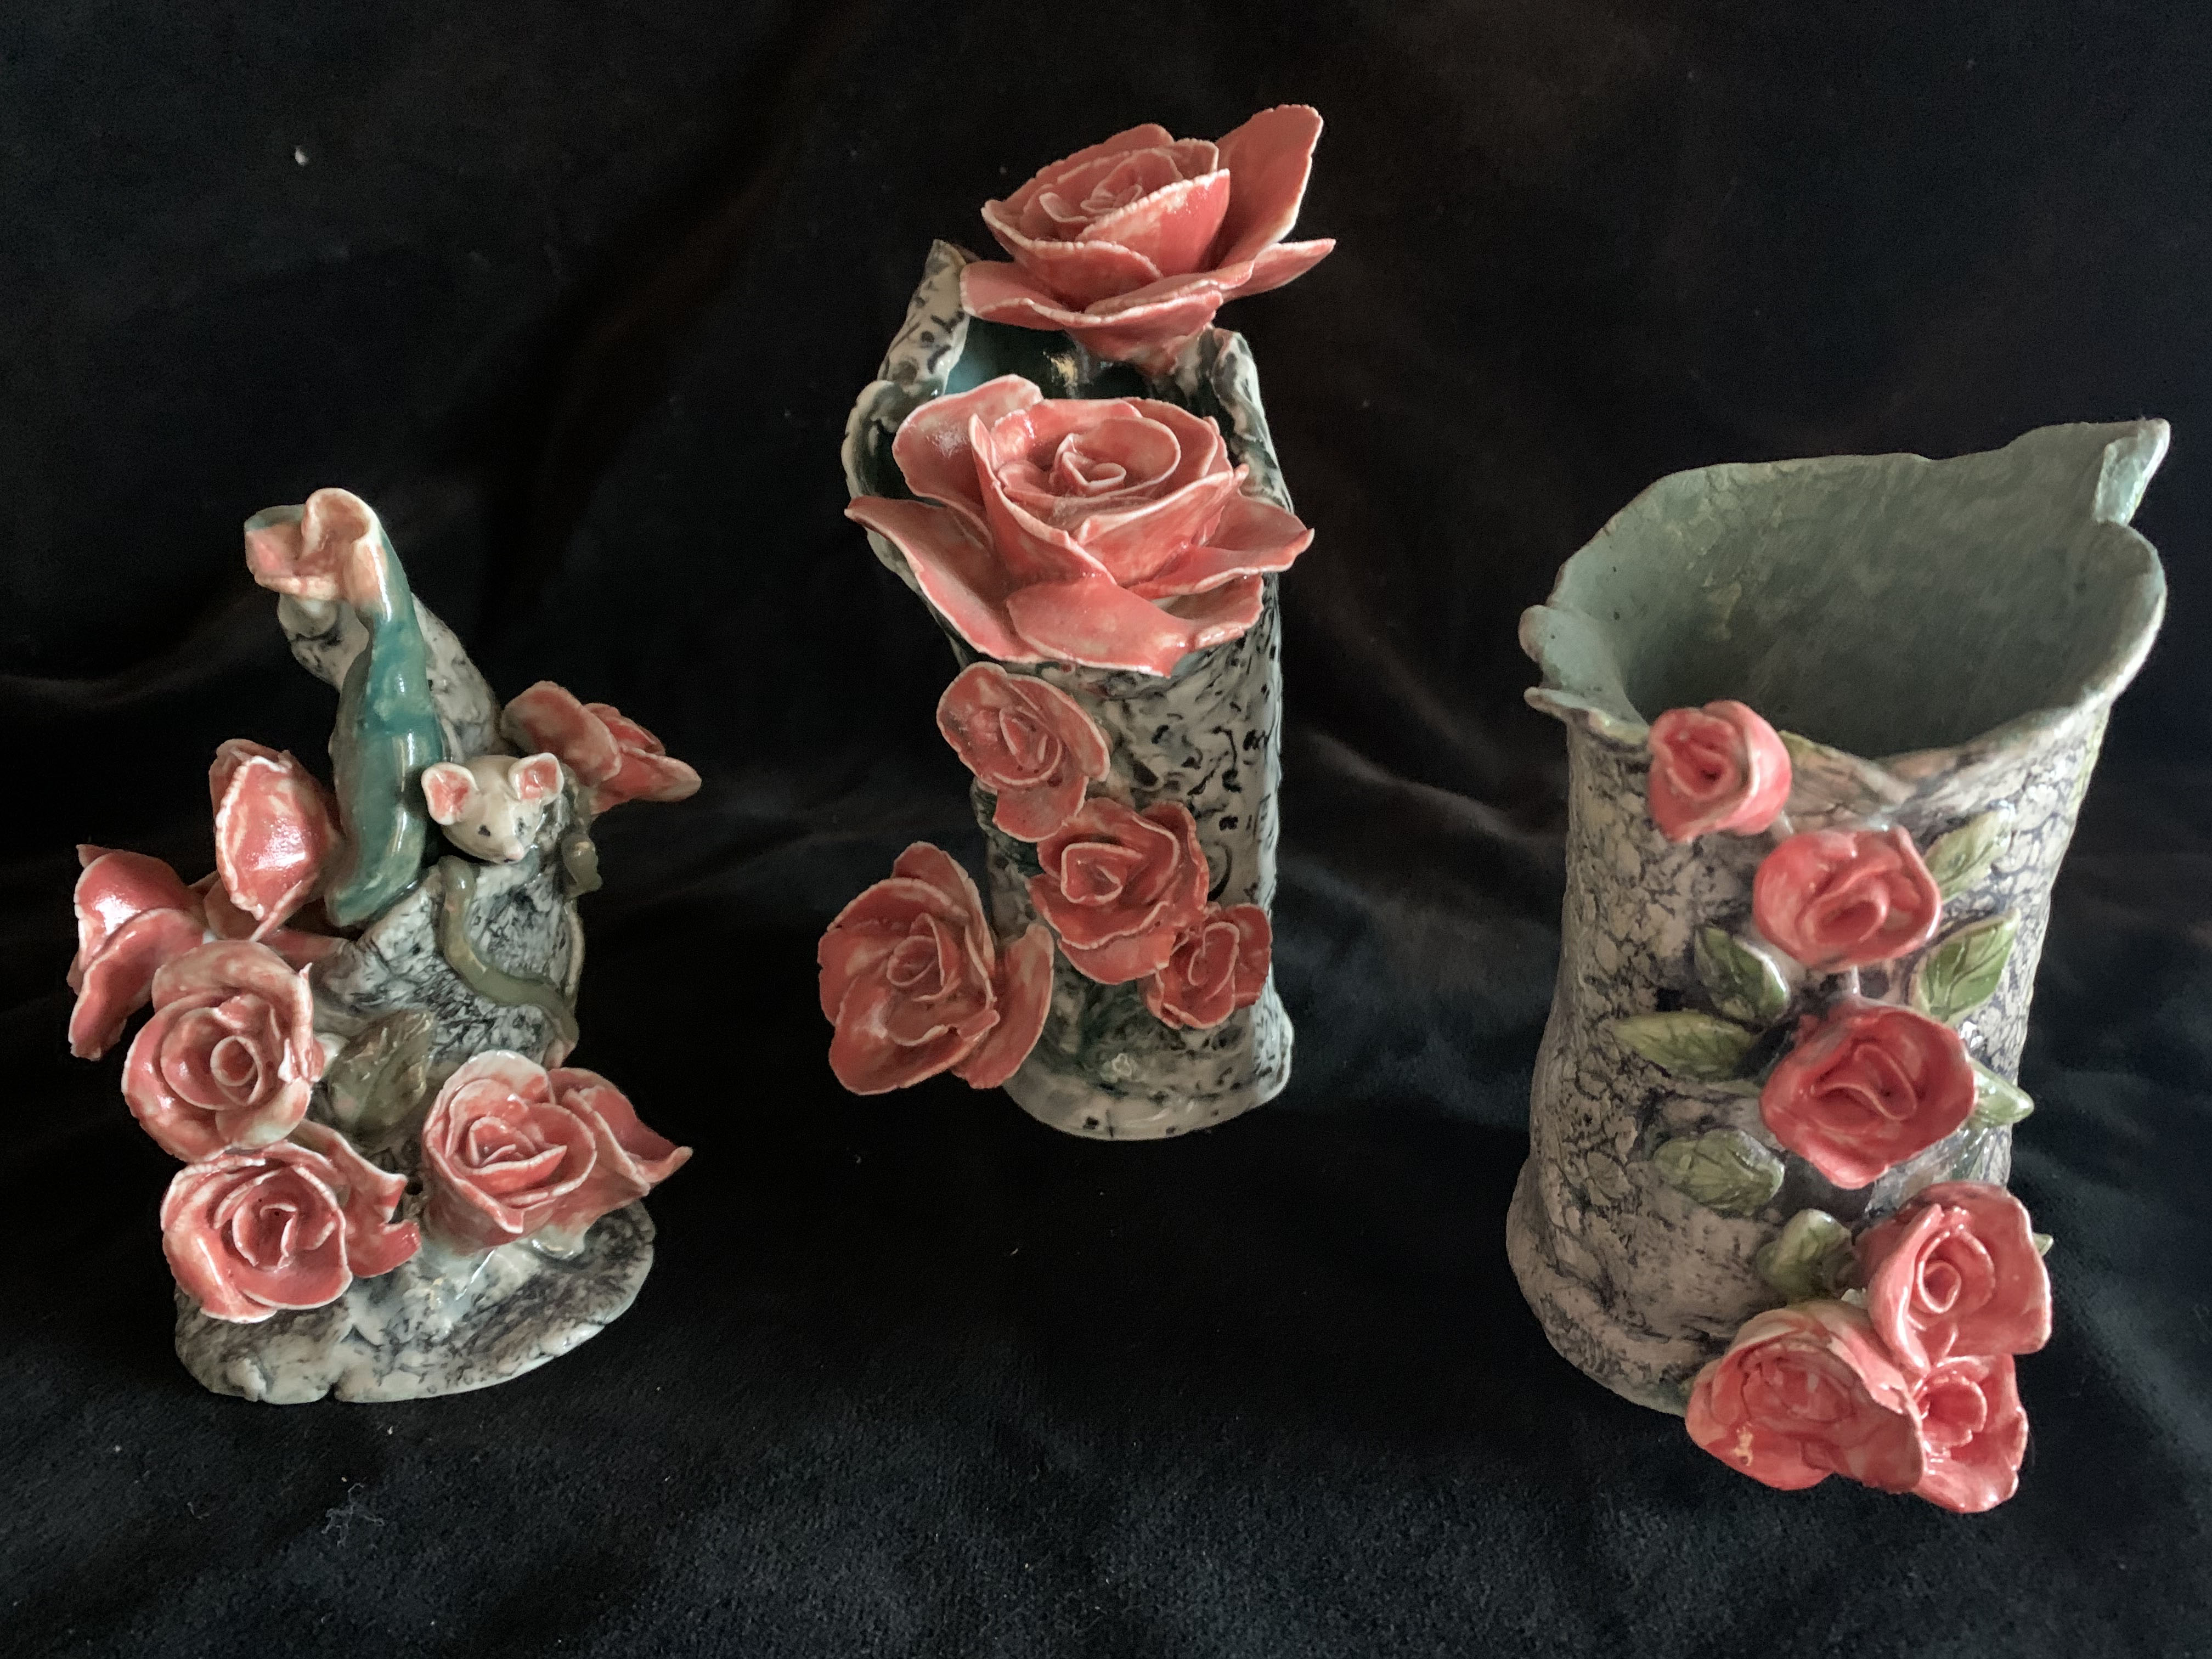 Set of three gray porcelain vessels with pink flowers and a mouse on one of them against a dark background